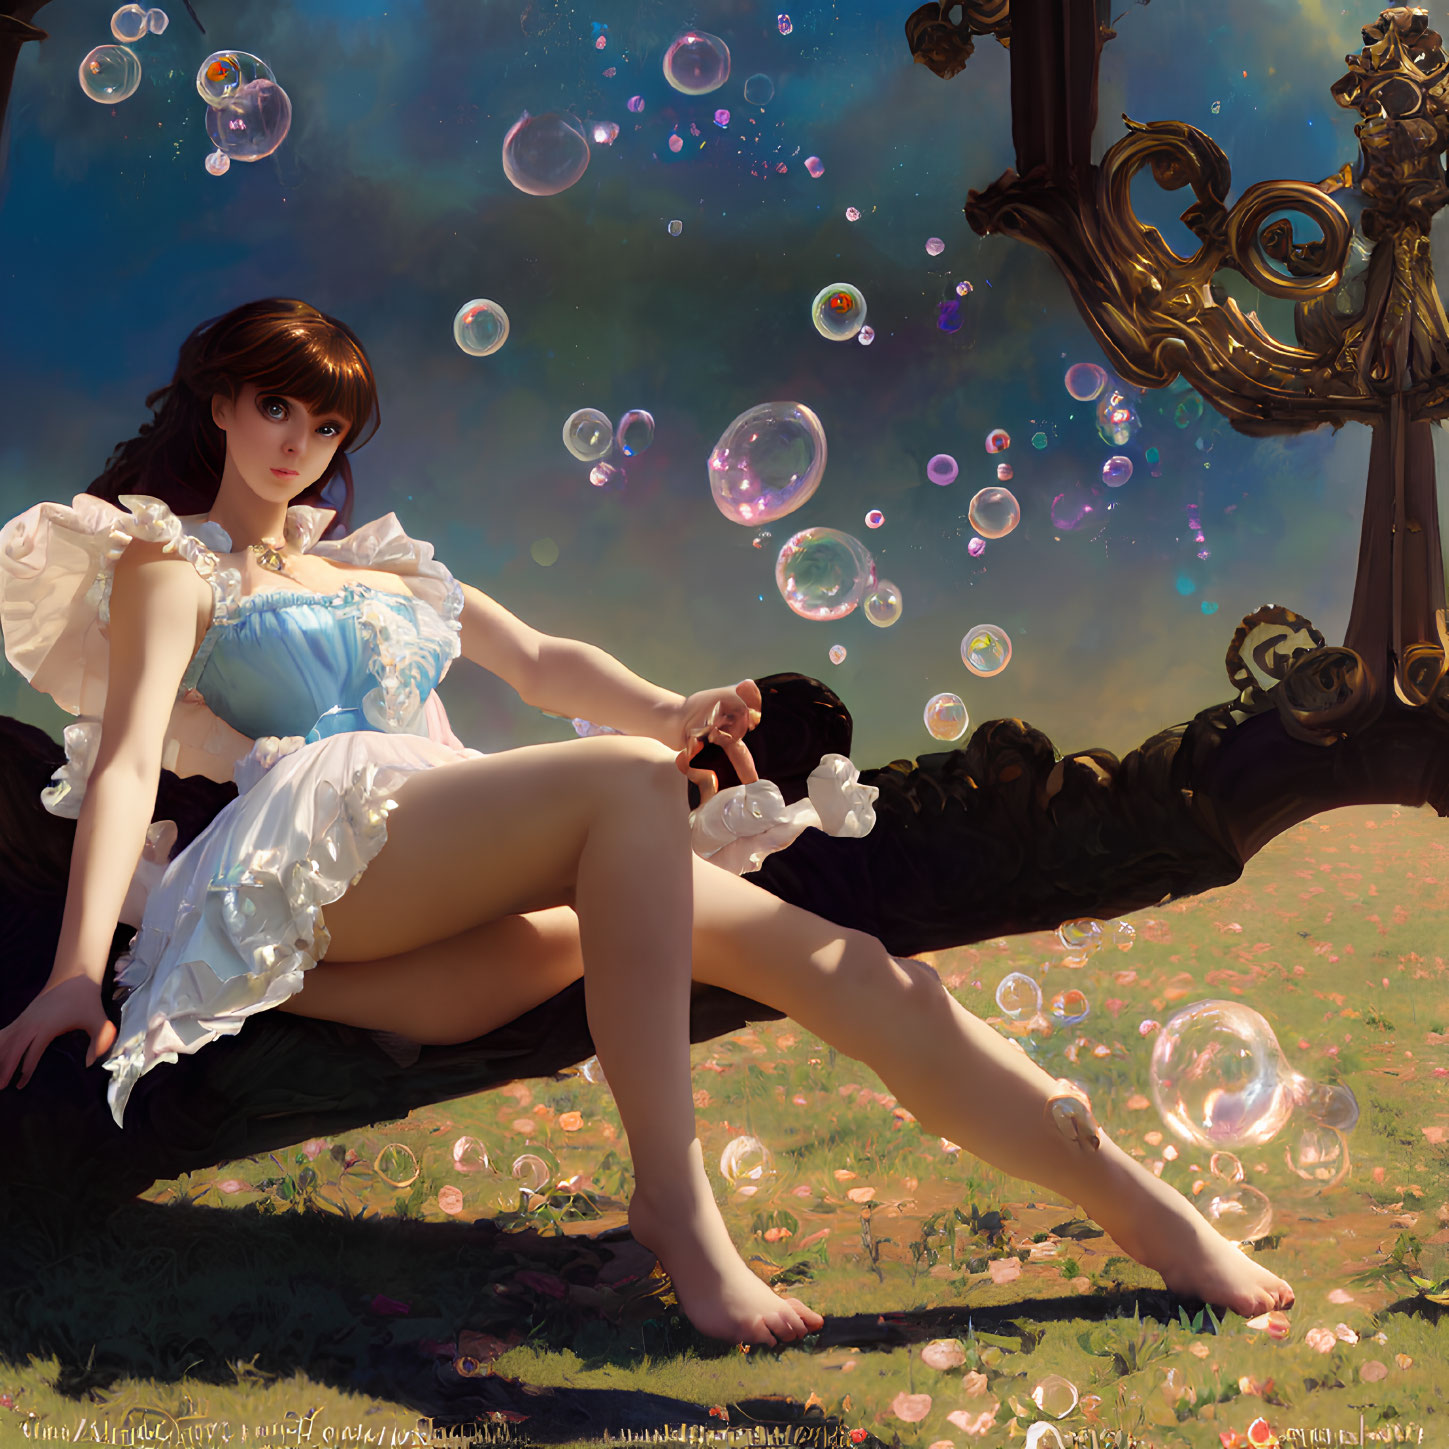 Young woman in vintage dress on bench with soap bubbles and whimsical sky